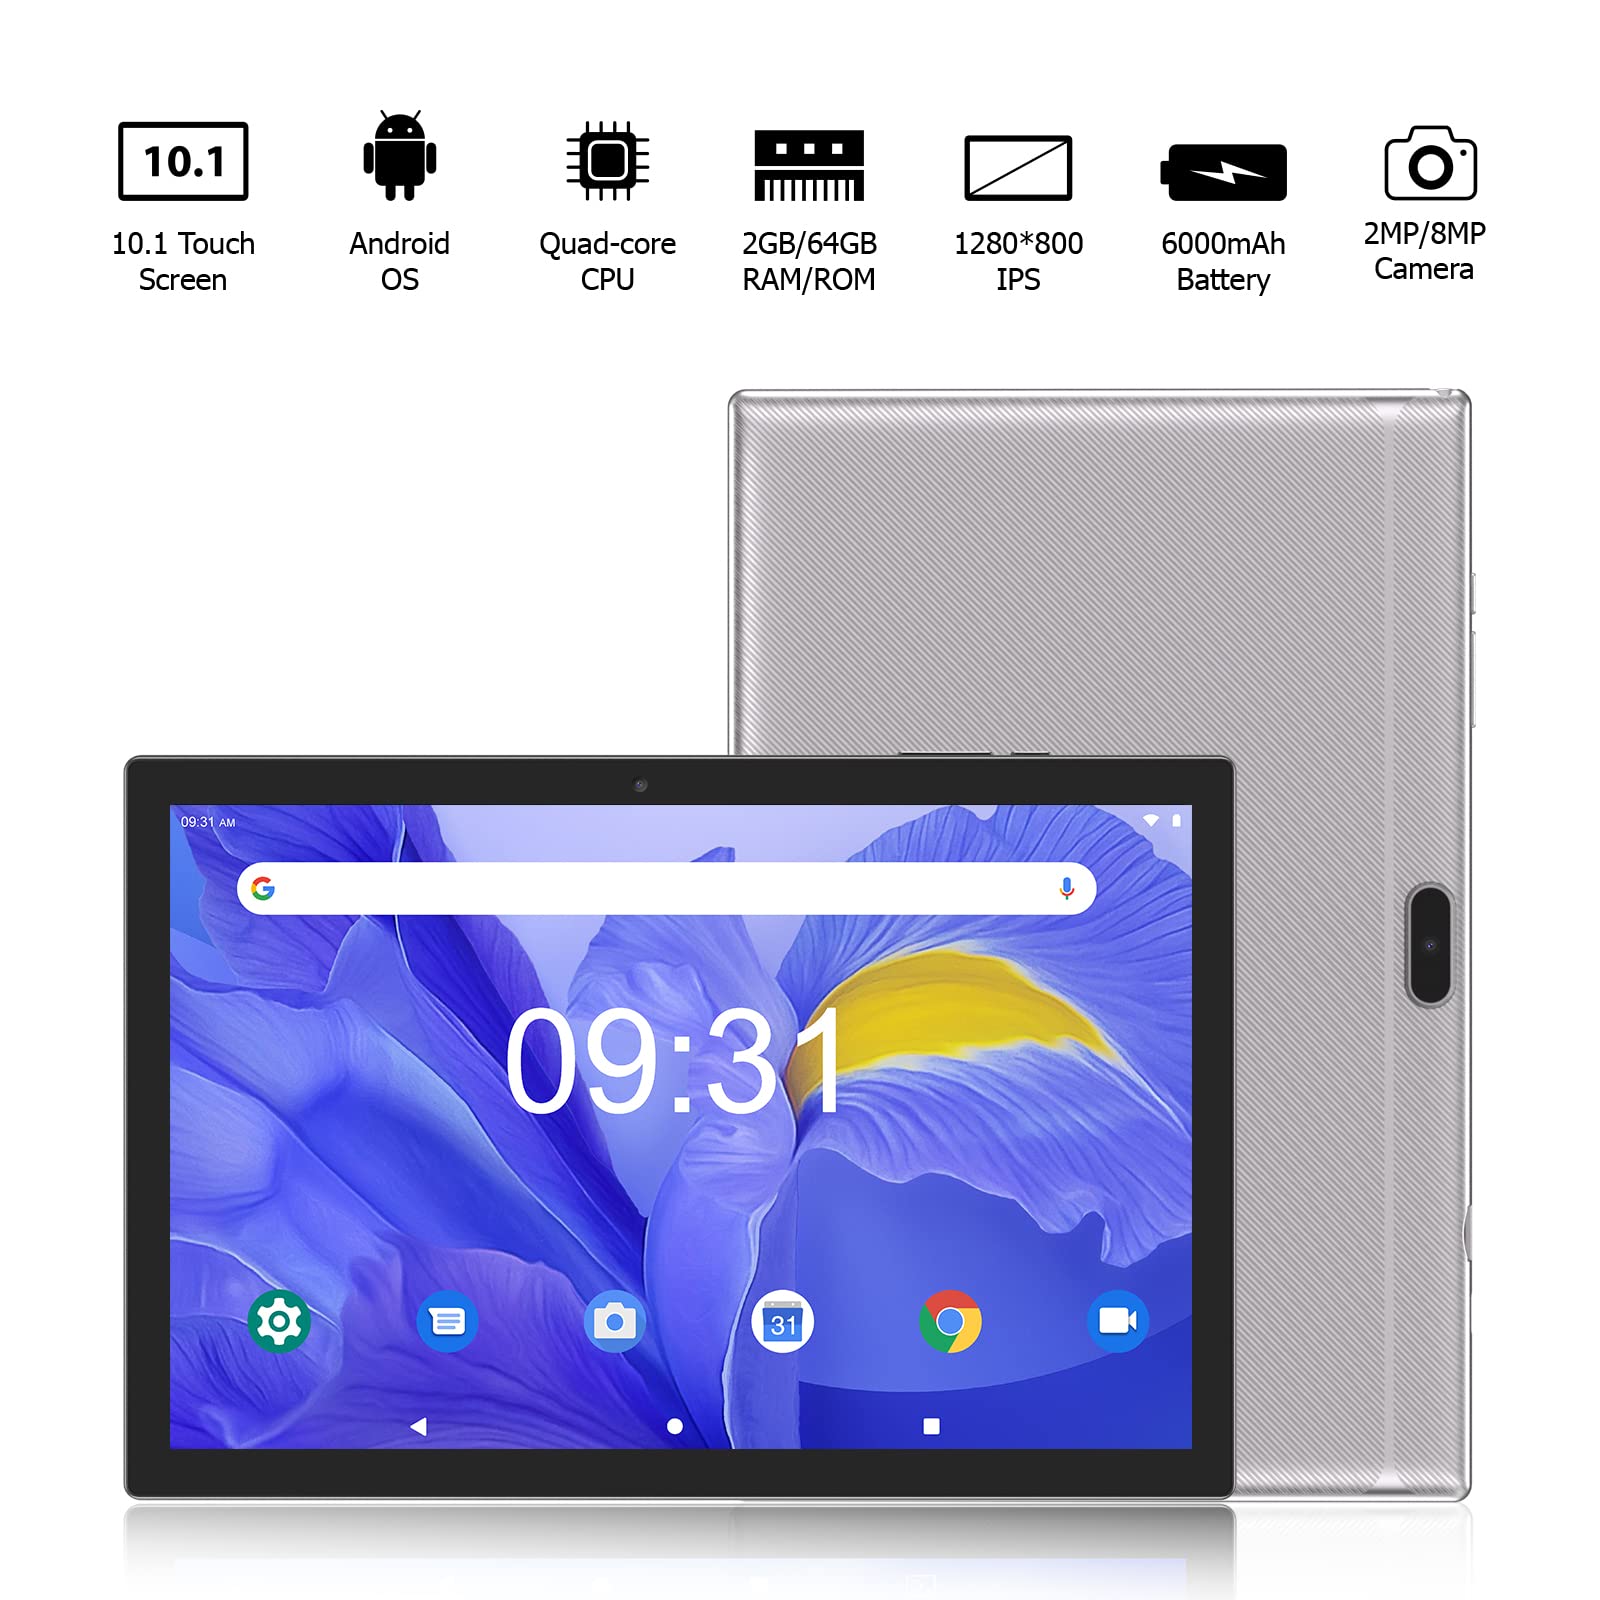 CUPEISI Android 12 Tablets, 10.1 inch Tablet 2GB+32GB Quad-Core Tablet, FHD 1280x800 Display Tablet, 6000mAH Battey, 8MP Dual Camera, Games, Wi-Fi, BT Tableta PC(Silver)